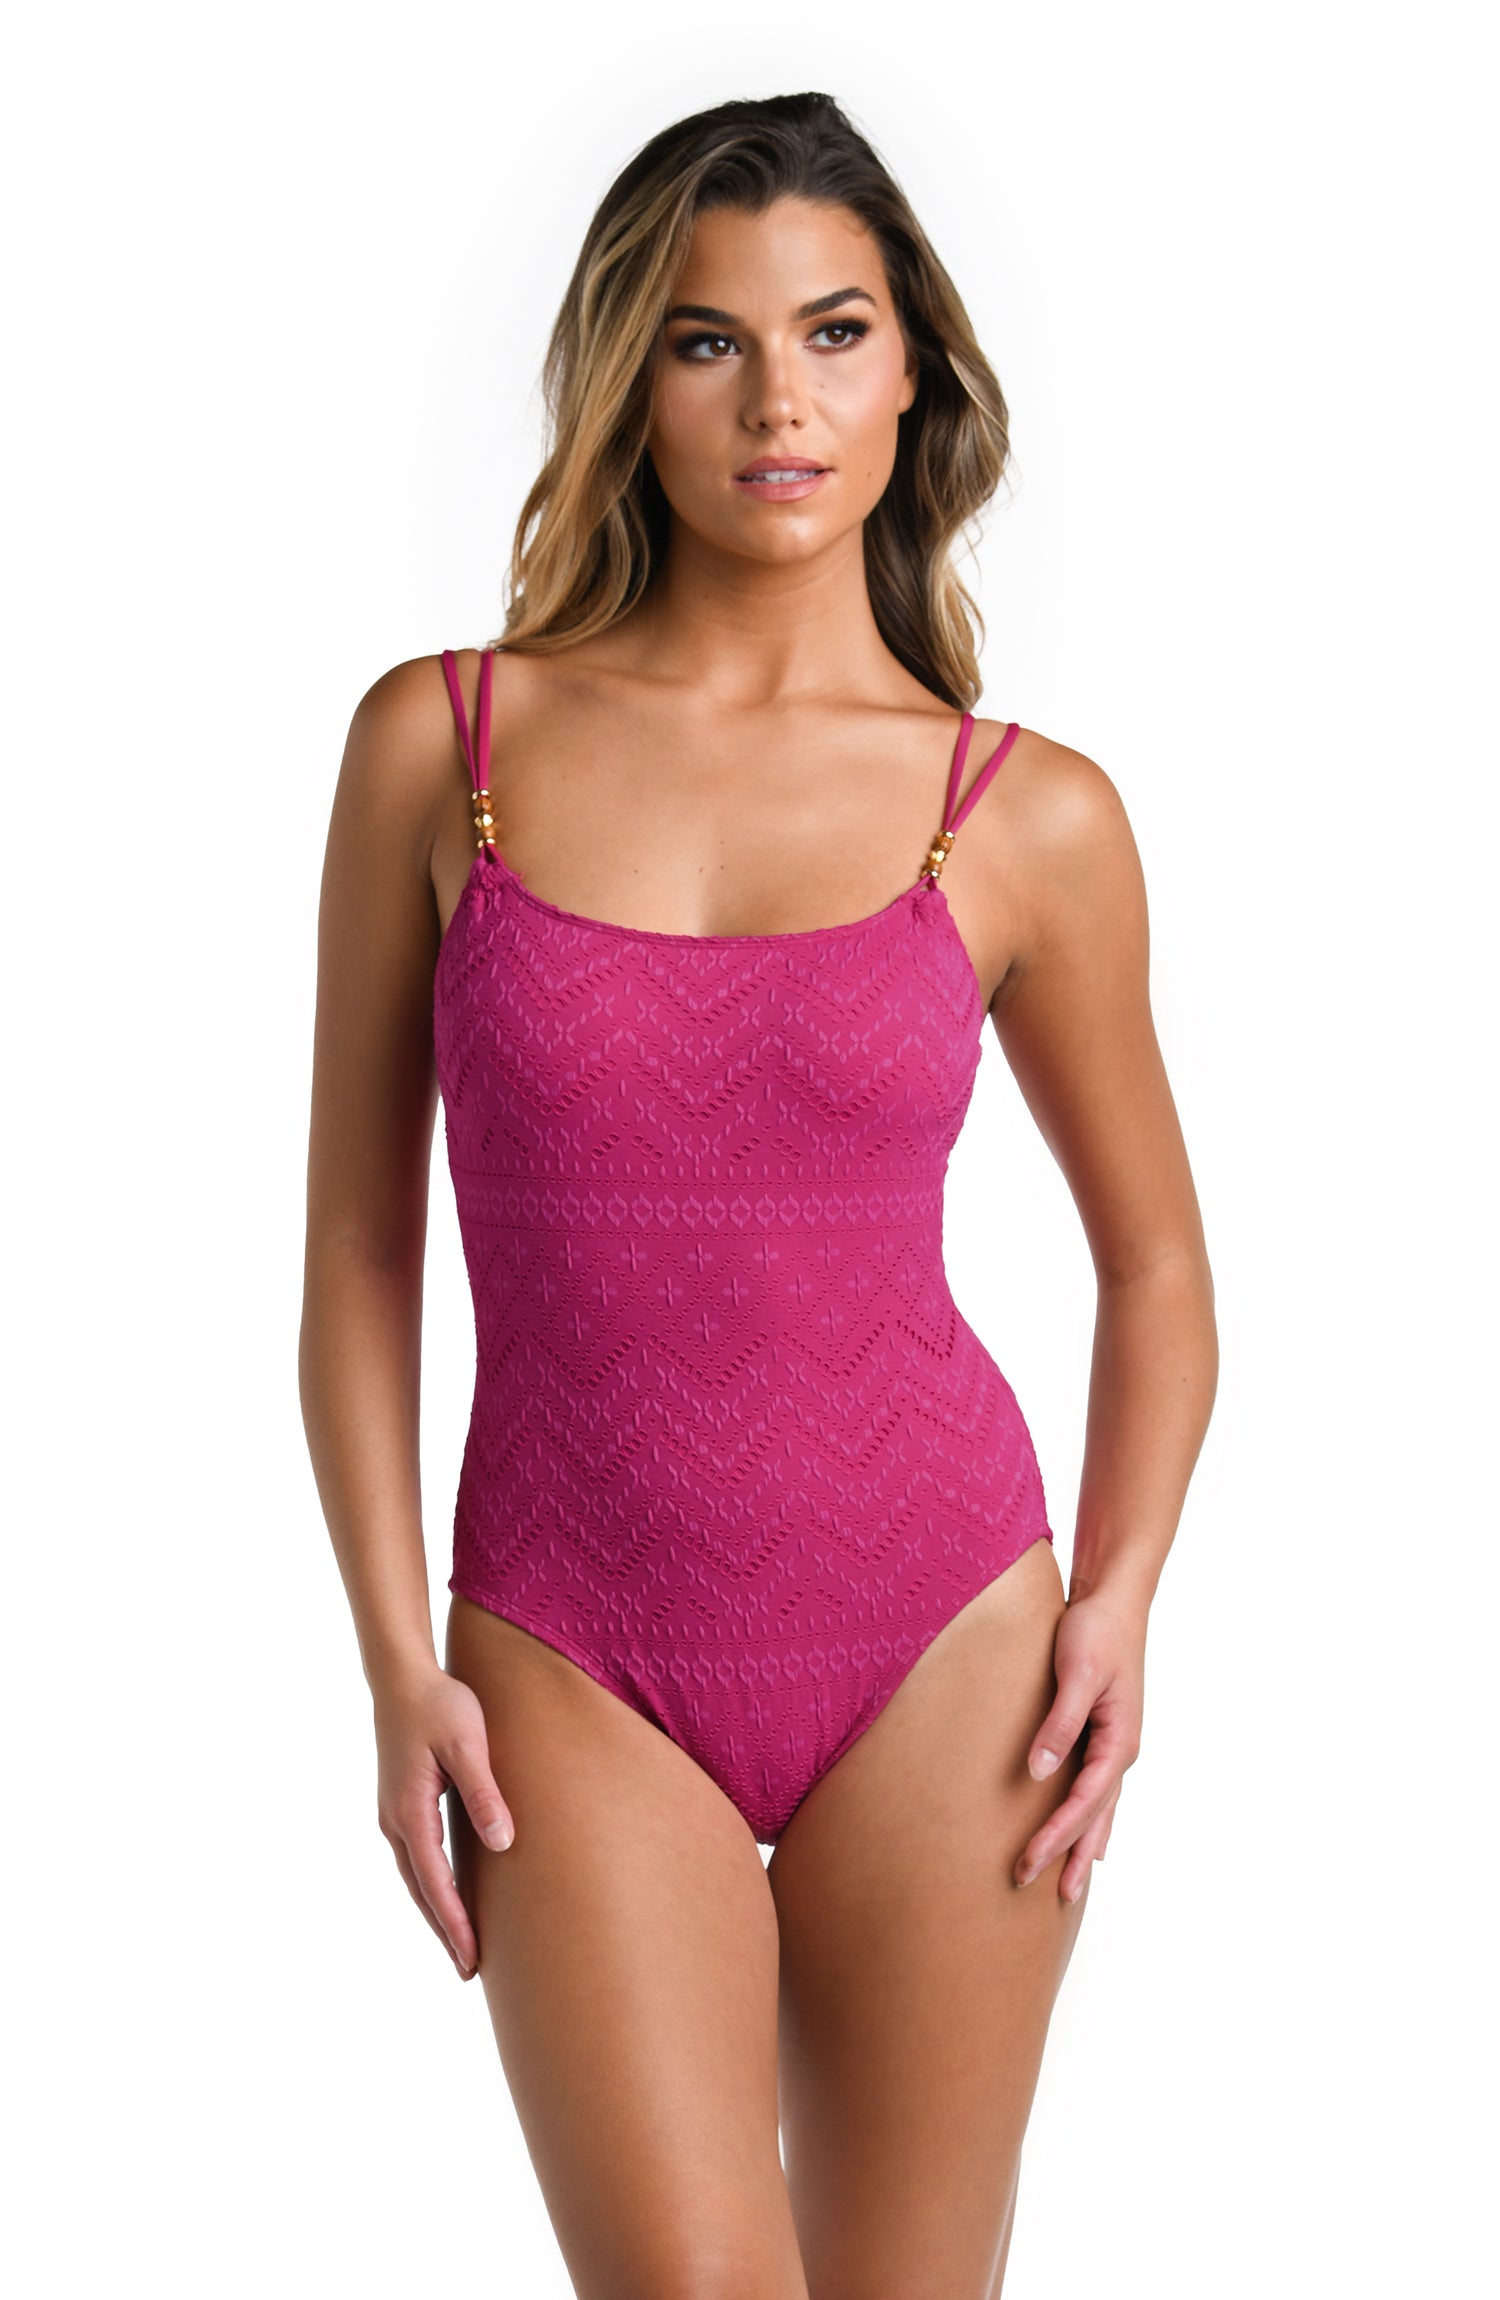 Model is wearing a multicolored Lingerie One Piece Swimsuit